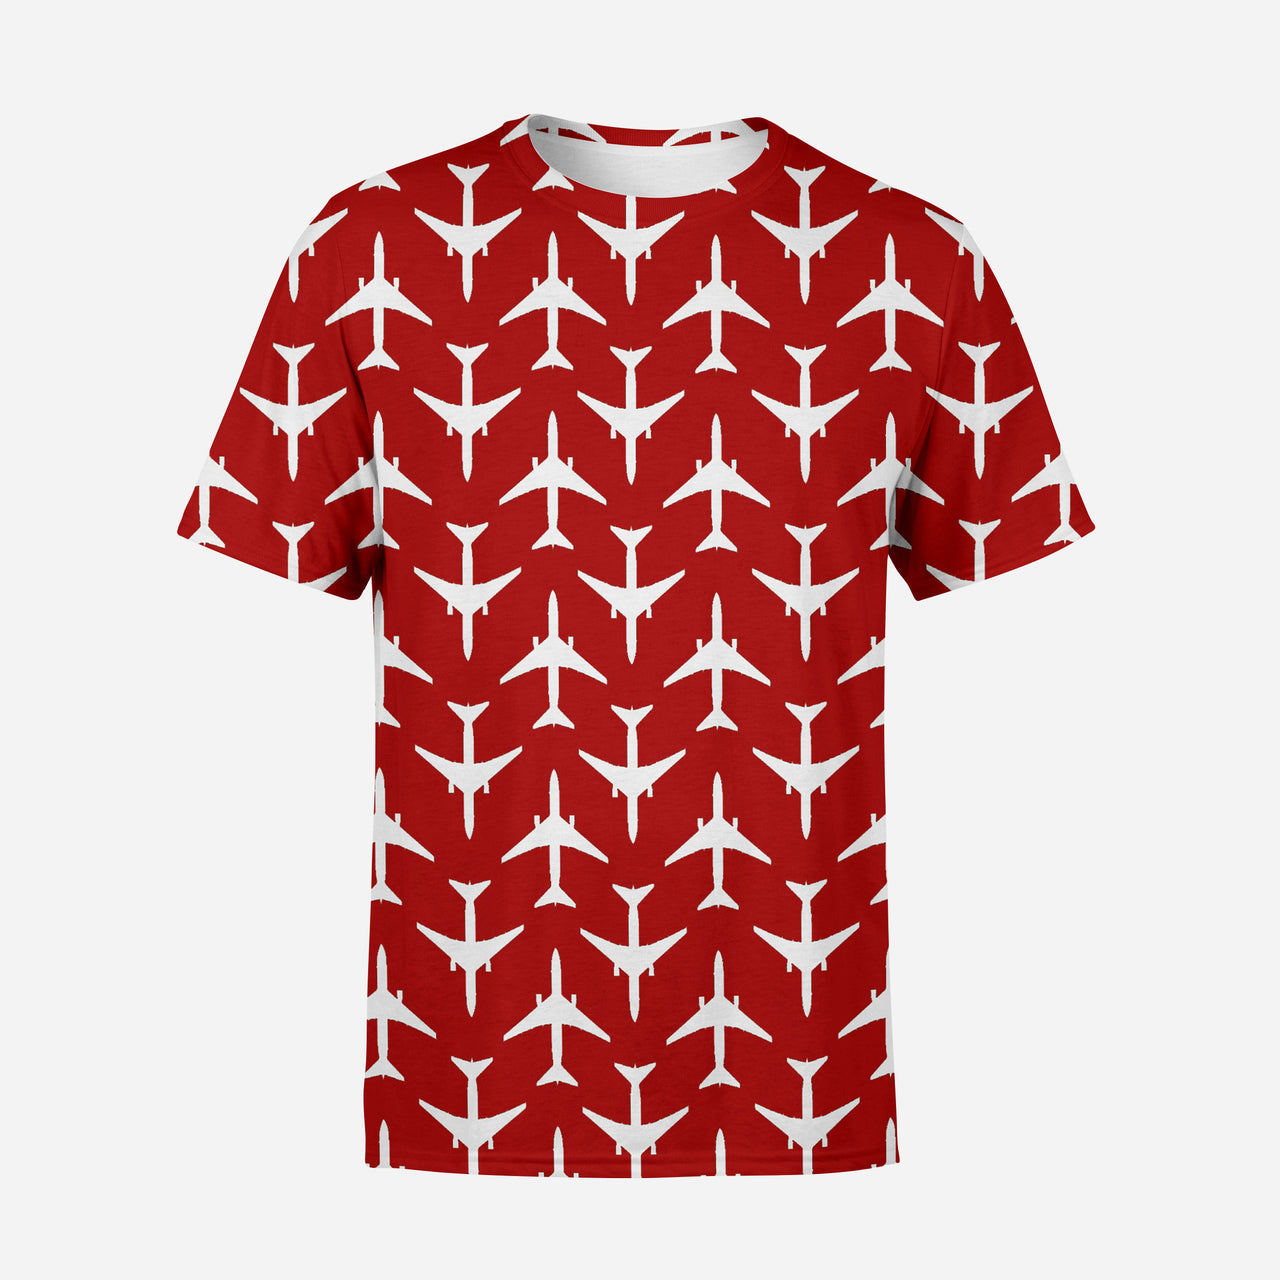 Perfectly Sized Seamless Airplanes Red Designed 3D T-Shirts